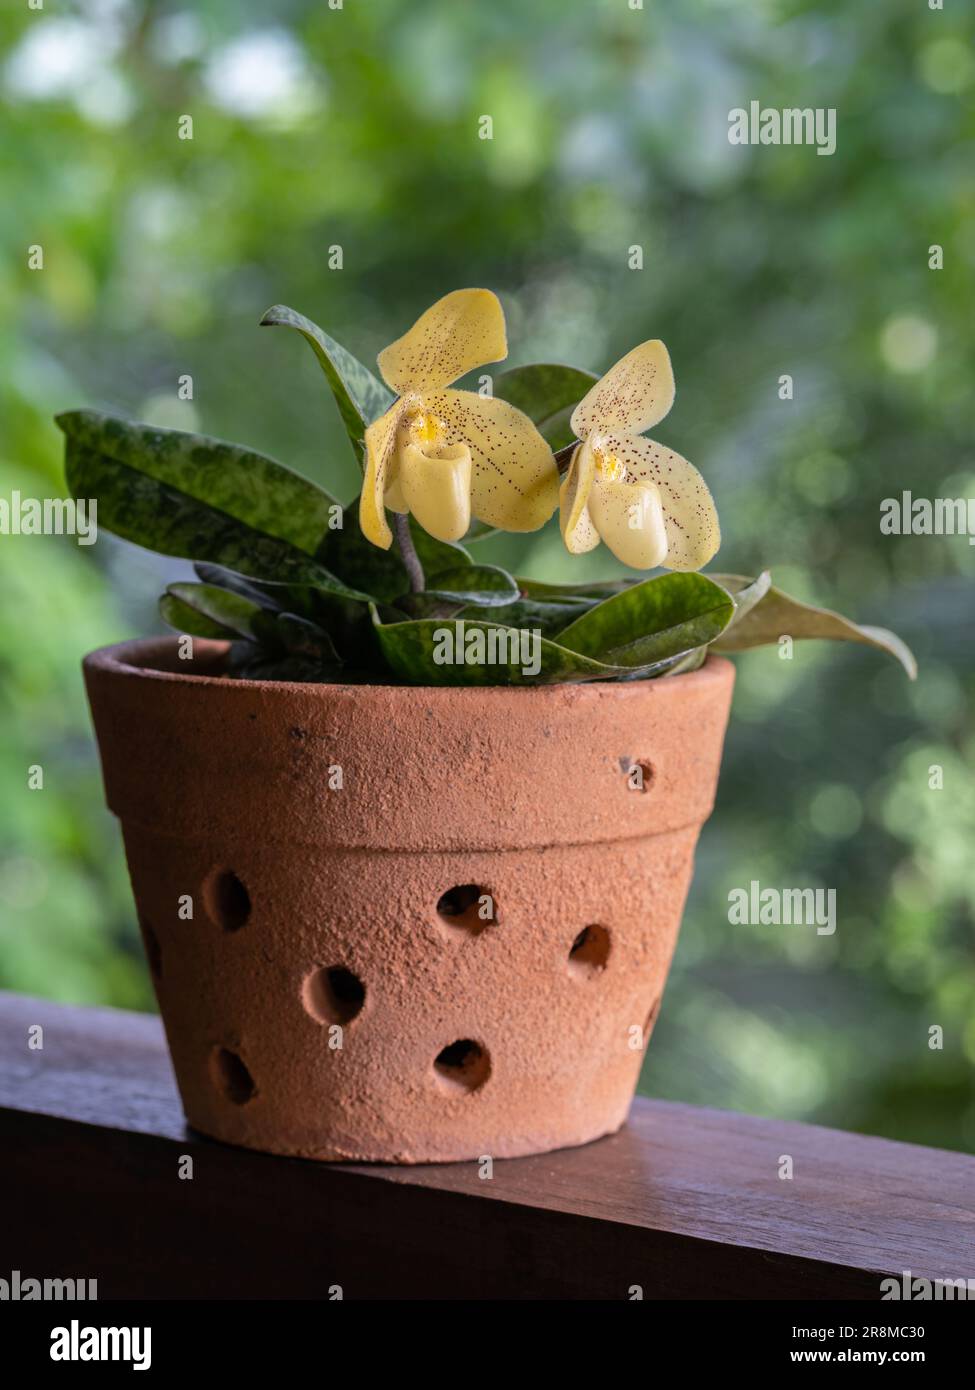 Closeup vertical view of lady slipper orchid species paphiopedilum concolor in pot with fresh yellow flowers blooming outdoors on natural background Stock Photo